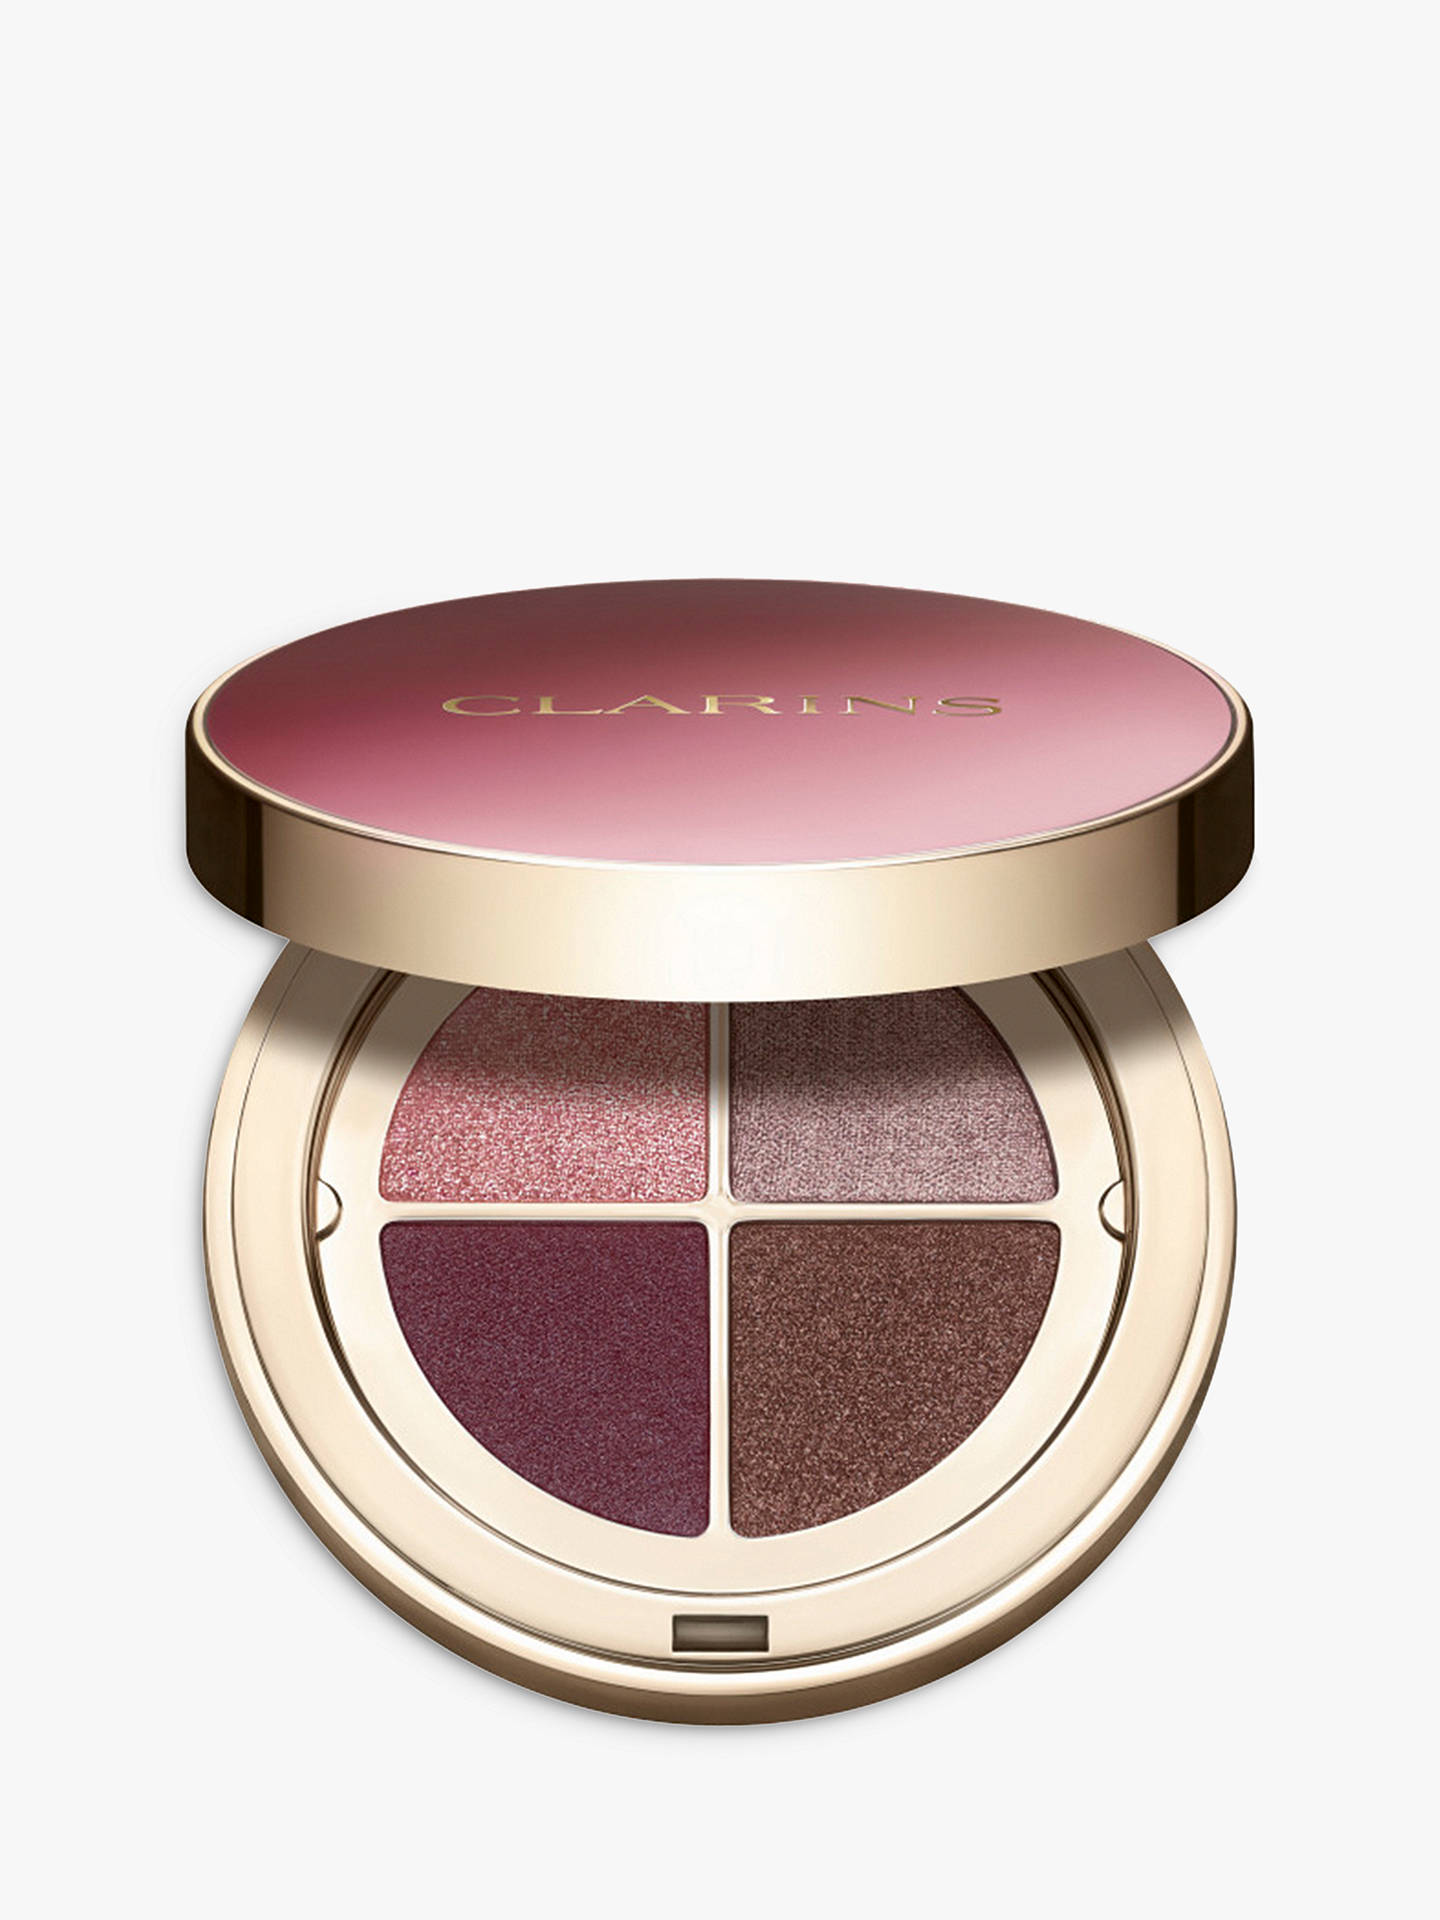 Clarins Ombre 4 Colour Eyeshadow Palette at John Lewis 